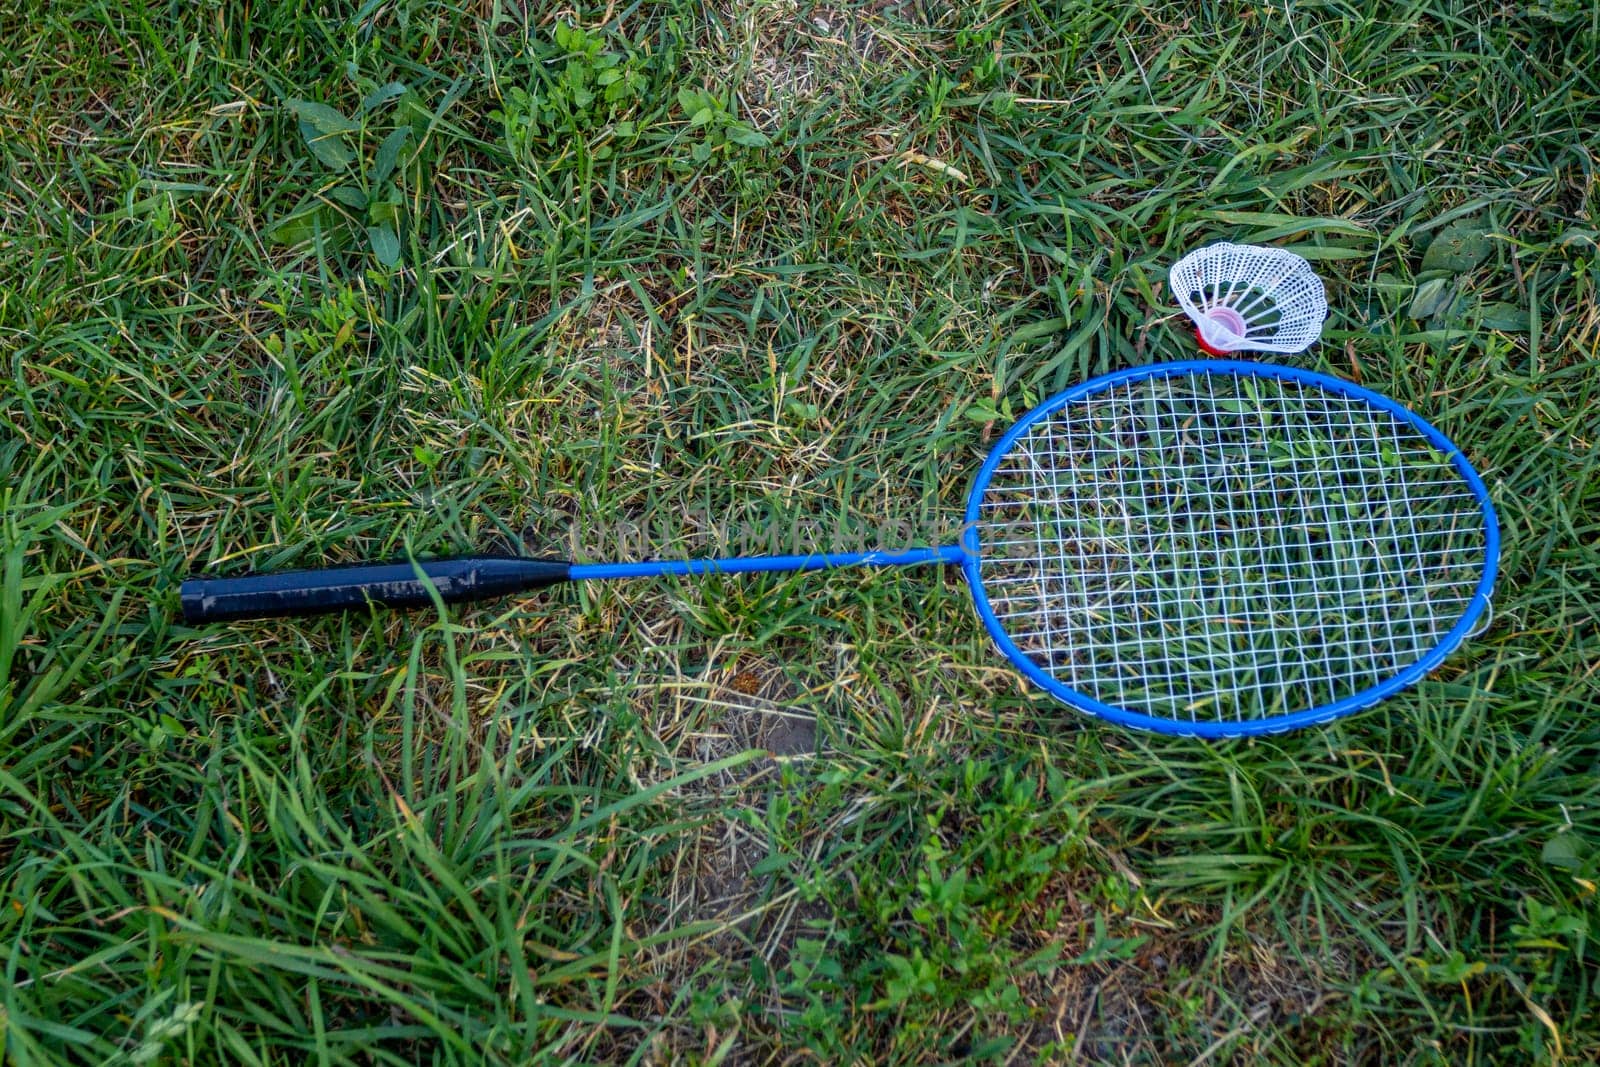 The badminton racket lying on the green grass. by electrovenik